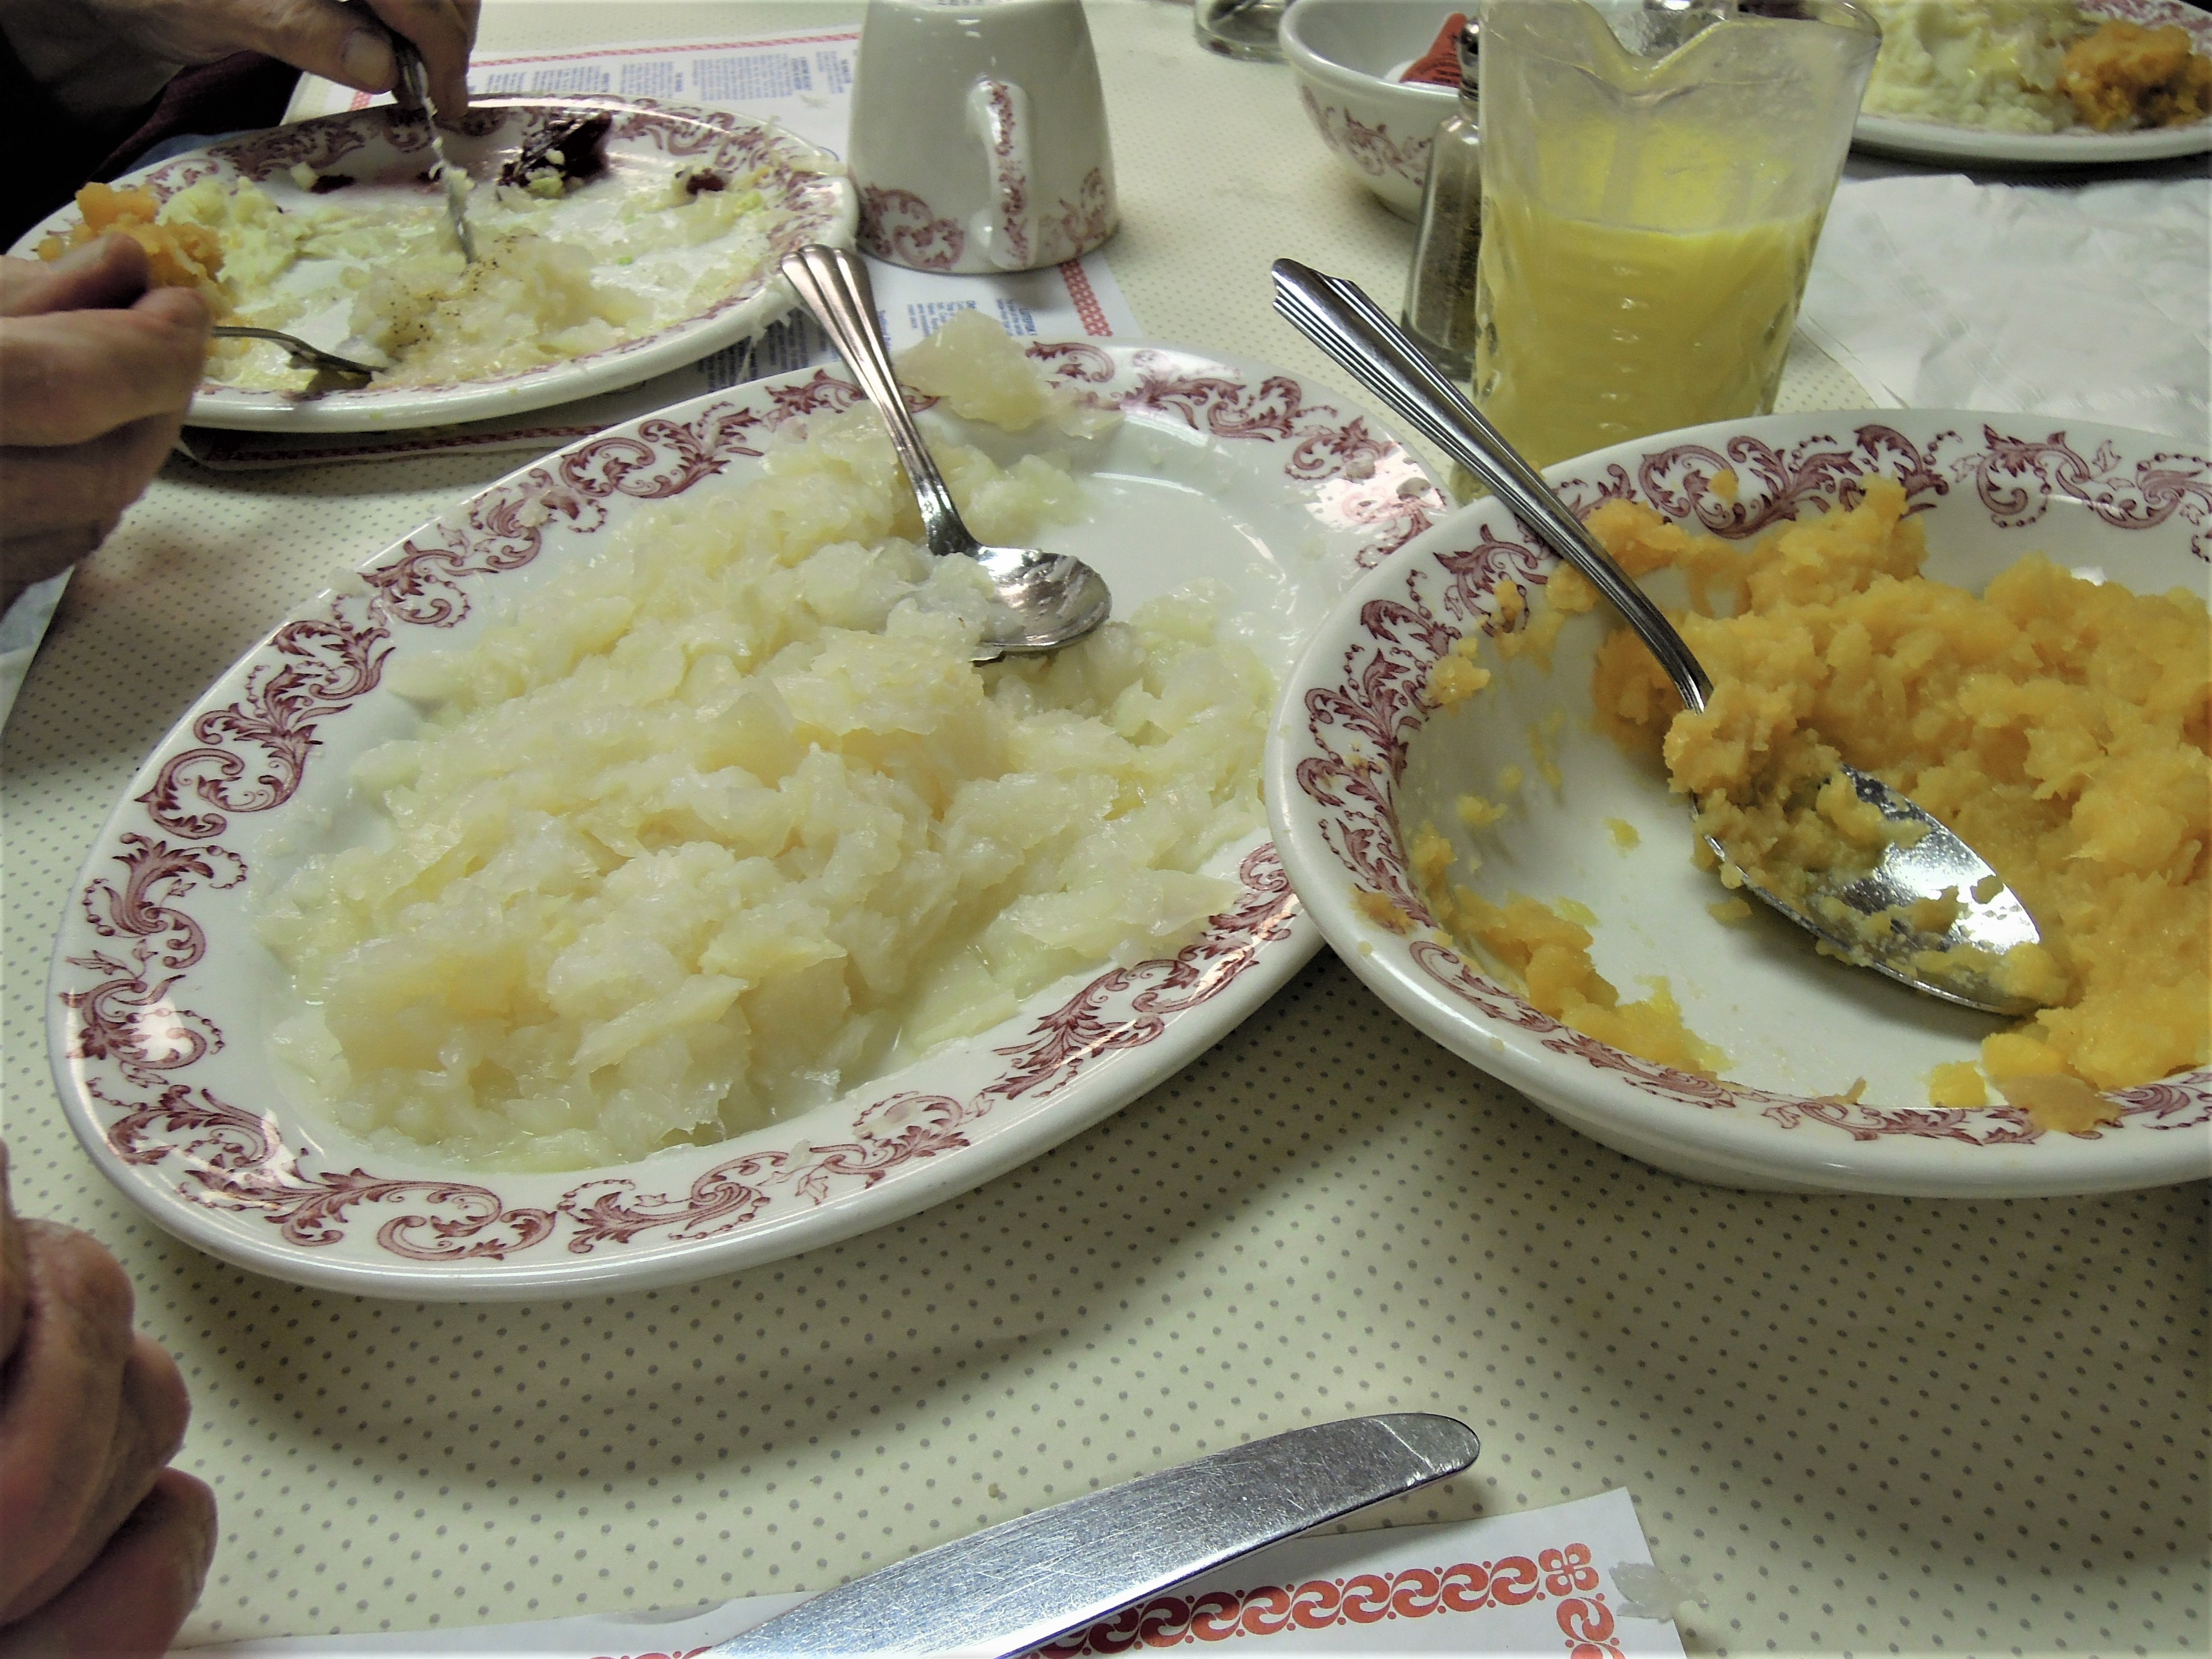 Plates of lutefisk and rutabaga served at Christ Lutheran Church in DeForest, Wisconsin.